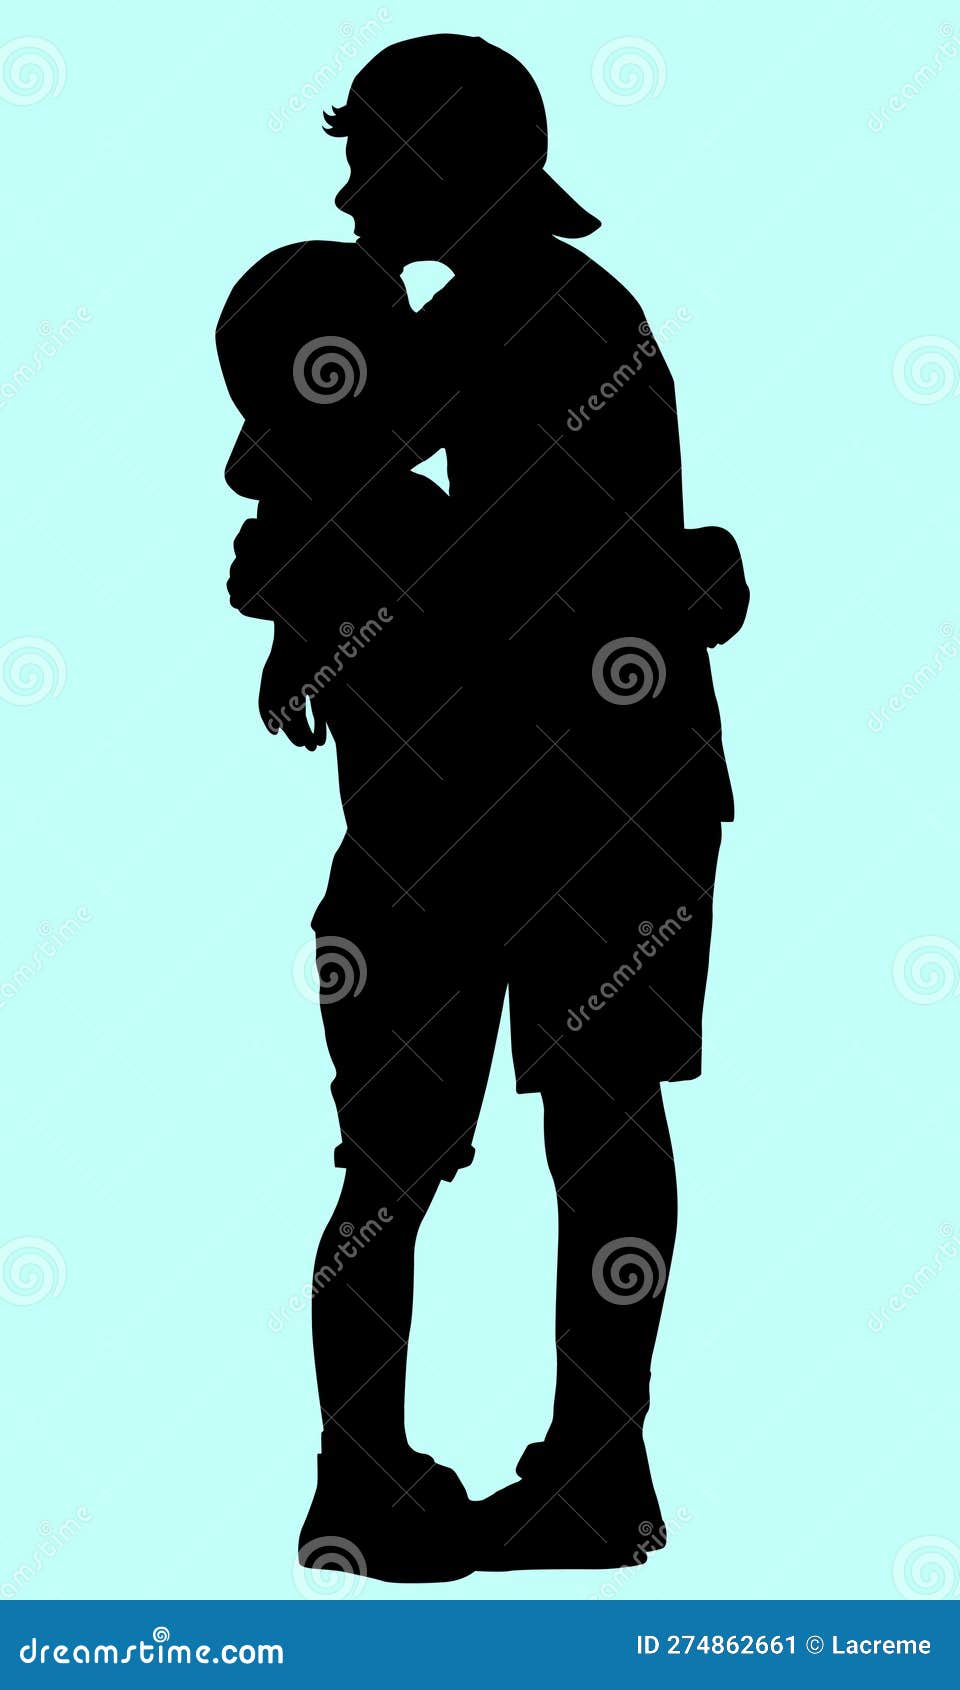 Holding Brothers Silhouettes Stock Vector - Illustration of lovely ...